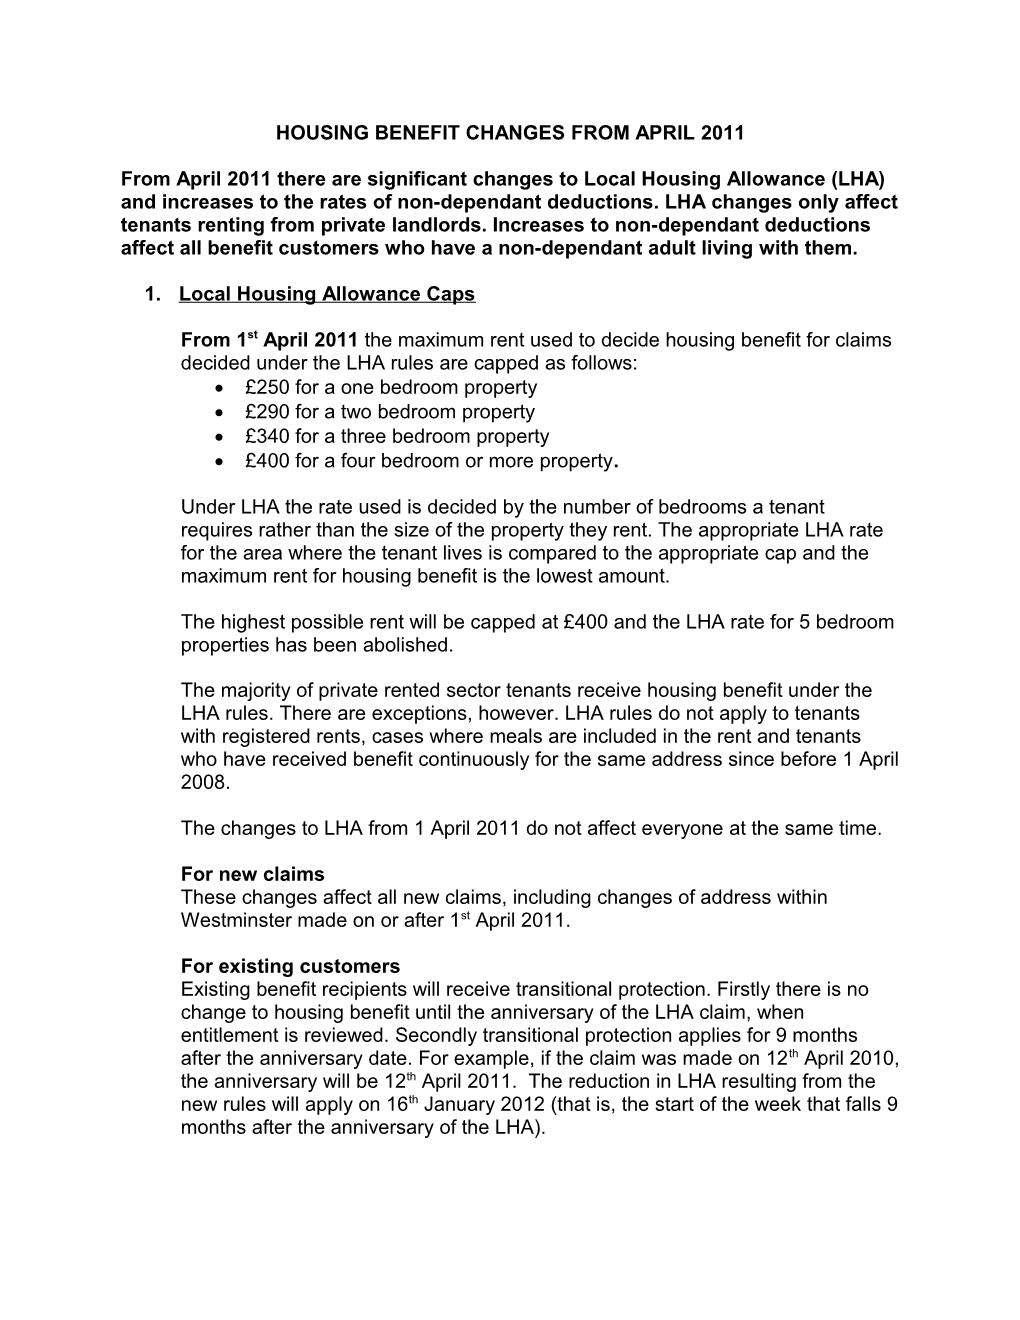 Housing Benefit Changes from April 2011